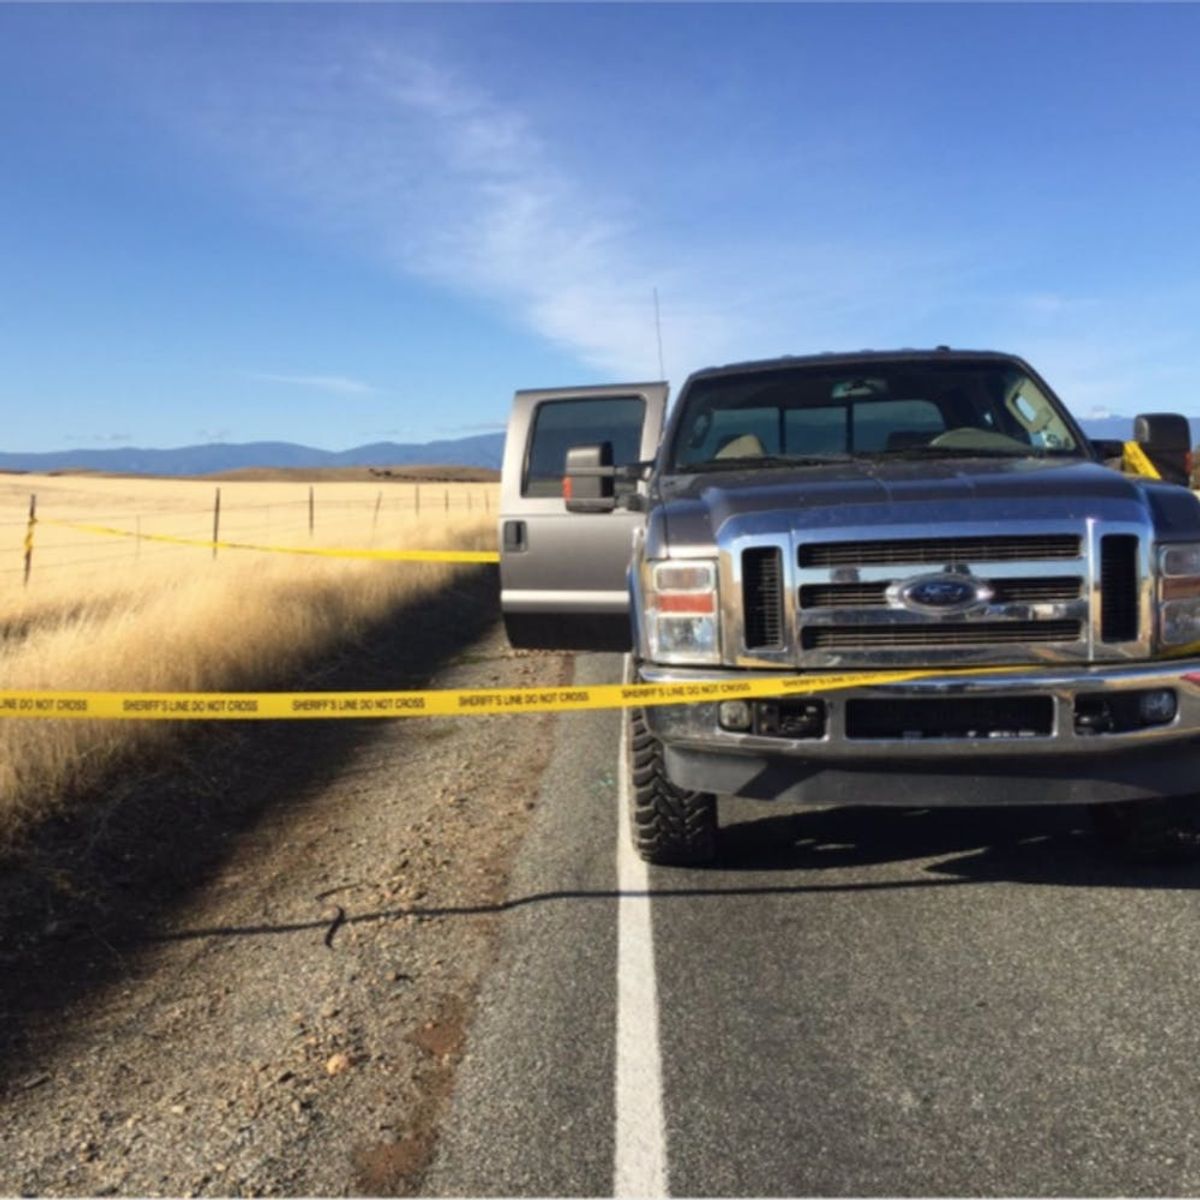 At Least Four People Dead After a Shooting Incident in Tehama County, California